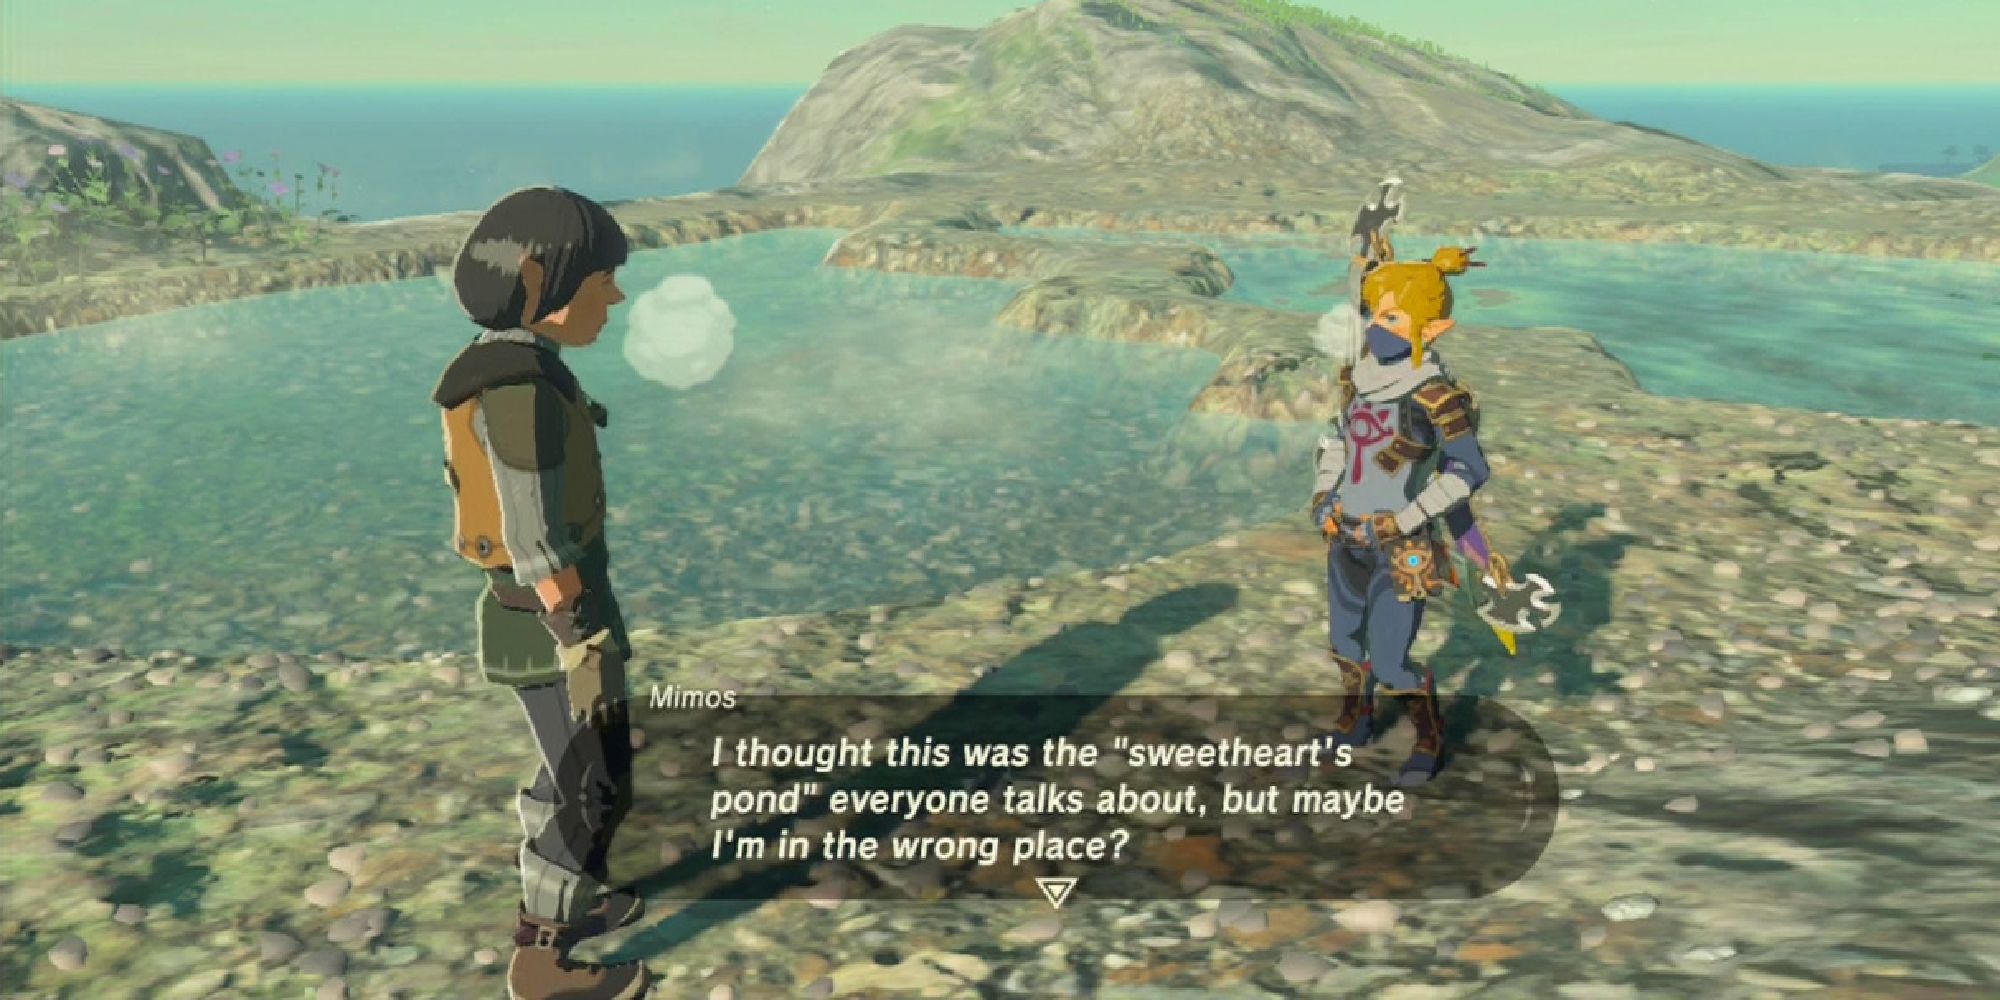 Link in Sheik's clothes talking to Mimos about the pond at the top of Ebon Mountain, which Mimos thought was "sweetheart's pond"